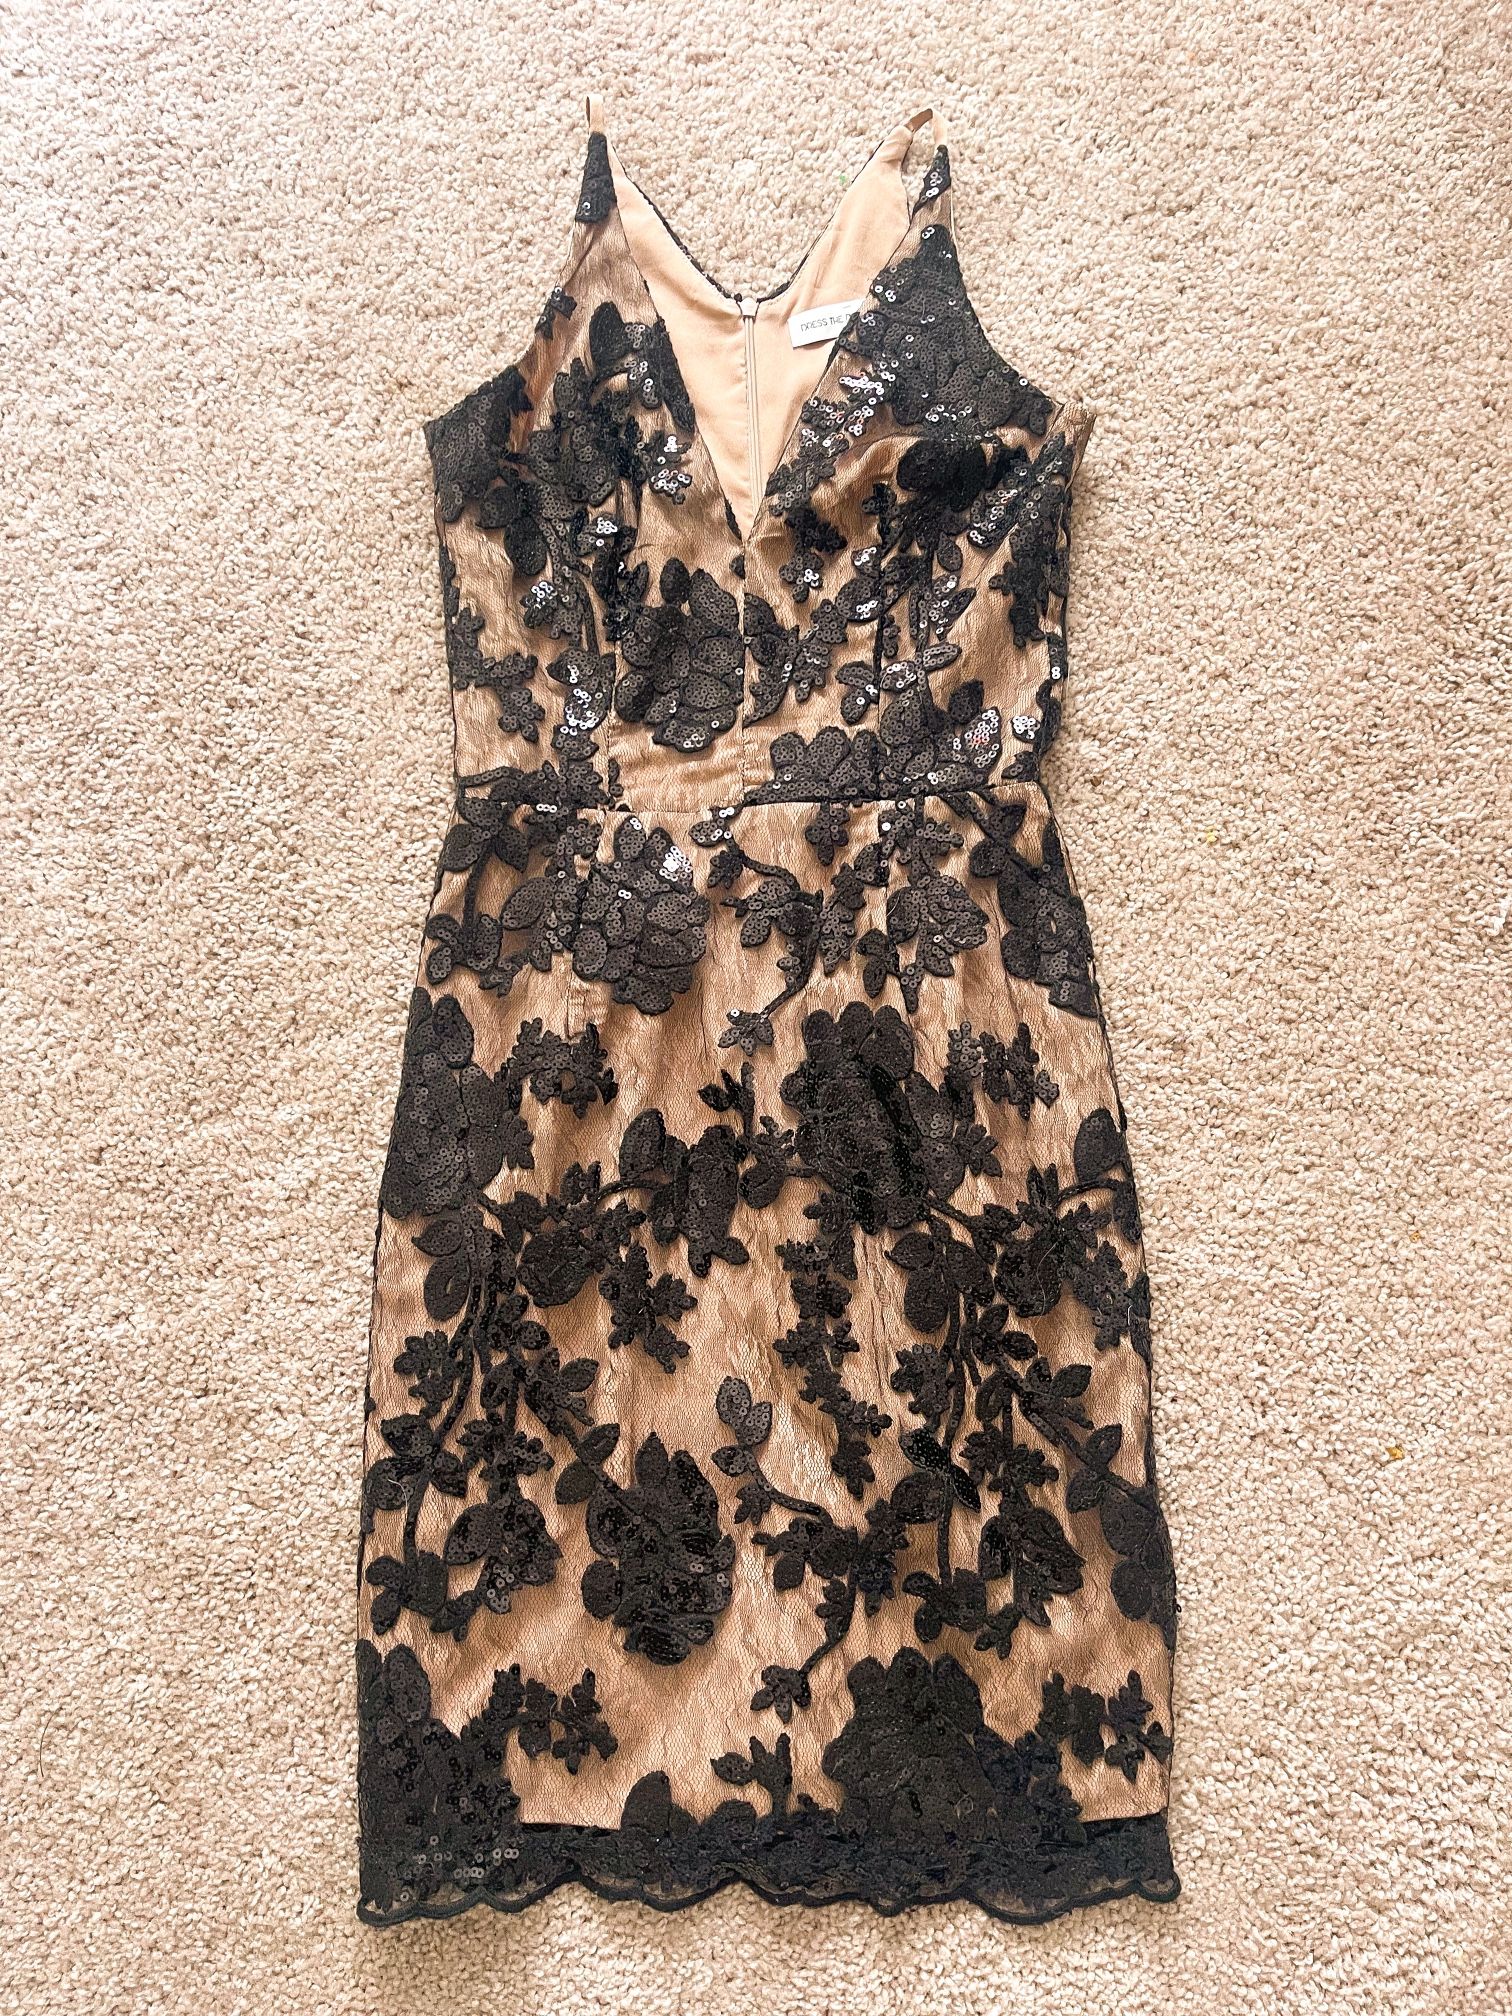 Tan And Black Sequin Dress